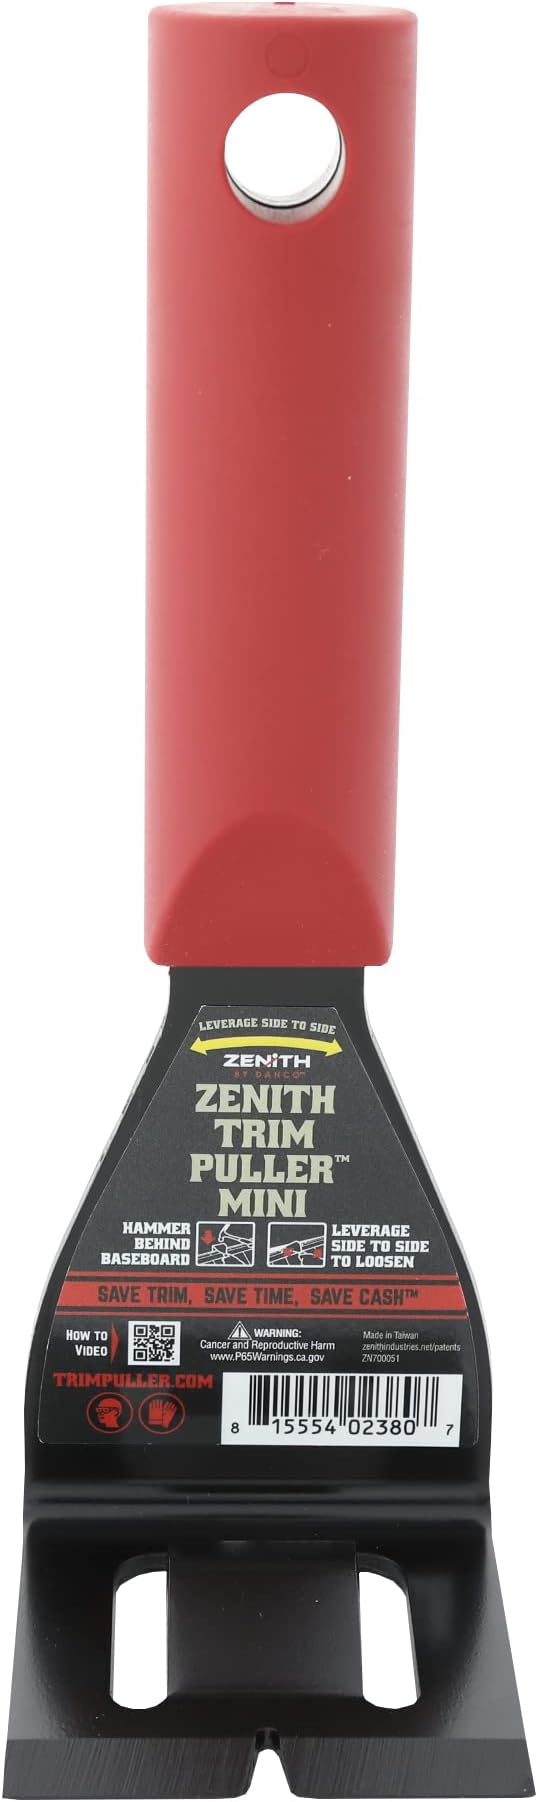 Zenith by Danco Trim Puller Mini ZN700051, Compact and Lightweight Tool for Easy Baseboard and Trim Removal, Ultimate Multi-Tool for Demolition and Remodeling Projects